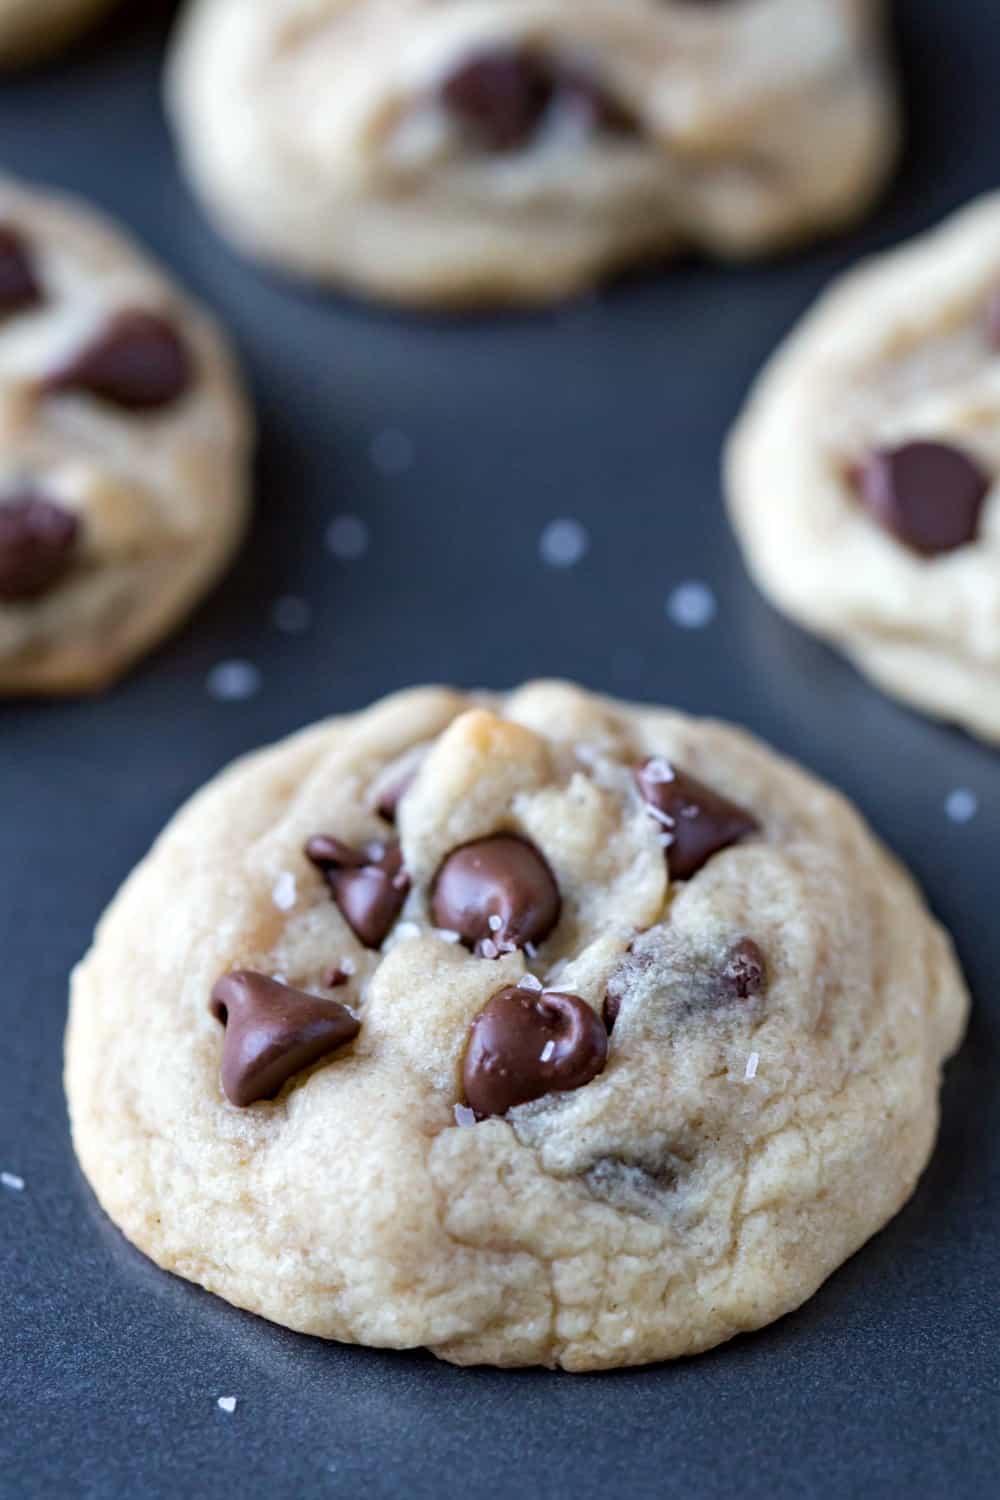 Easiest Chocolate Chip Cookie Recipe - I Heart Eating